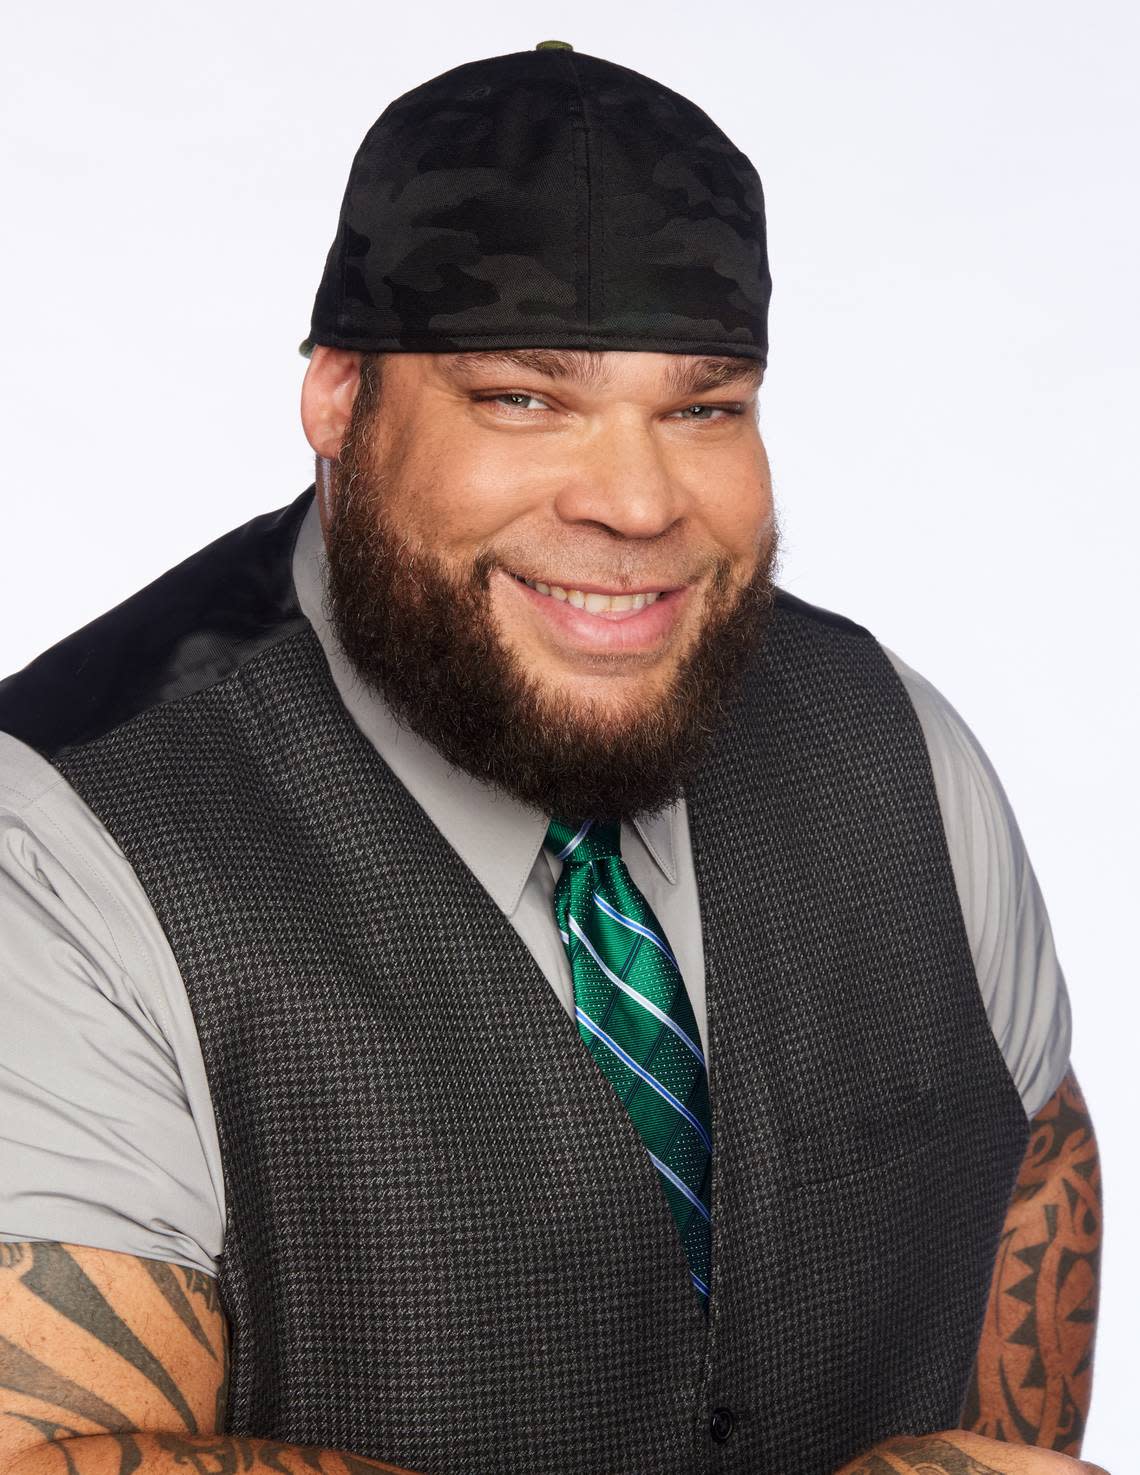 NWA TV champ and WWE alum Tyrus is an integral part of “Gutfeld!,” the No.1 late night talk show 